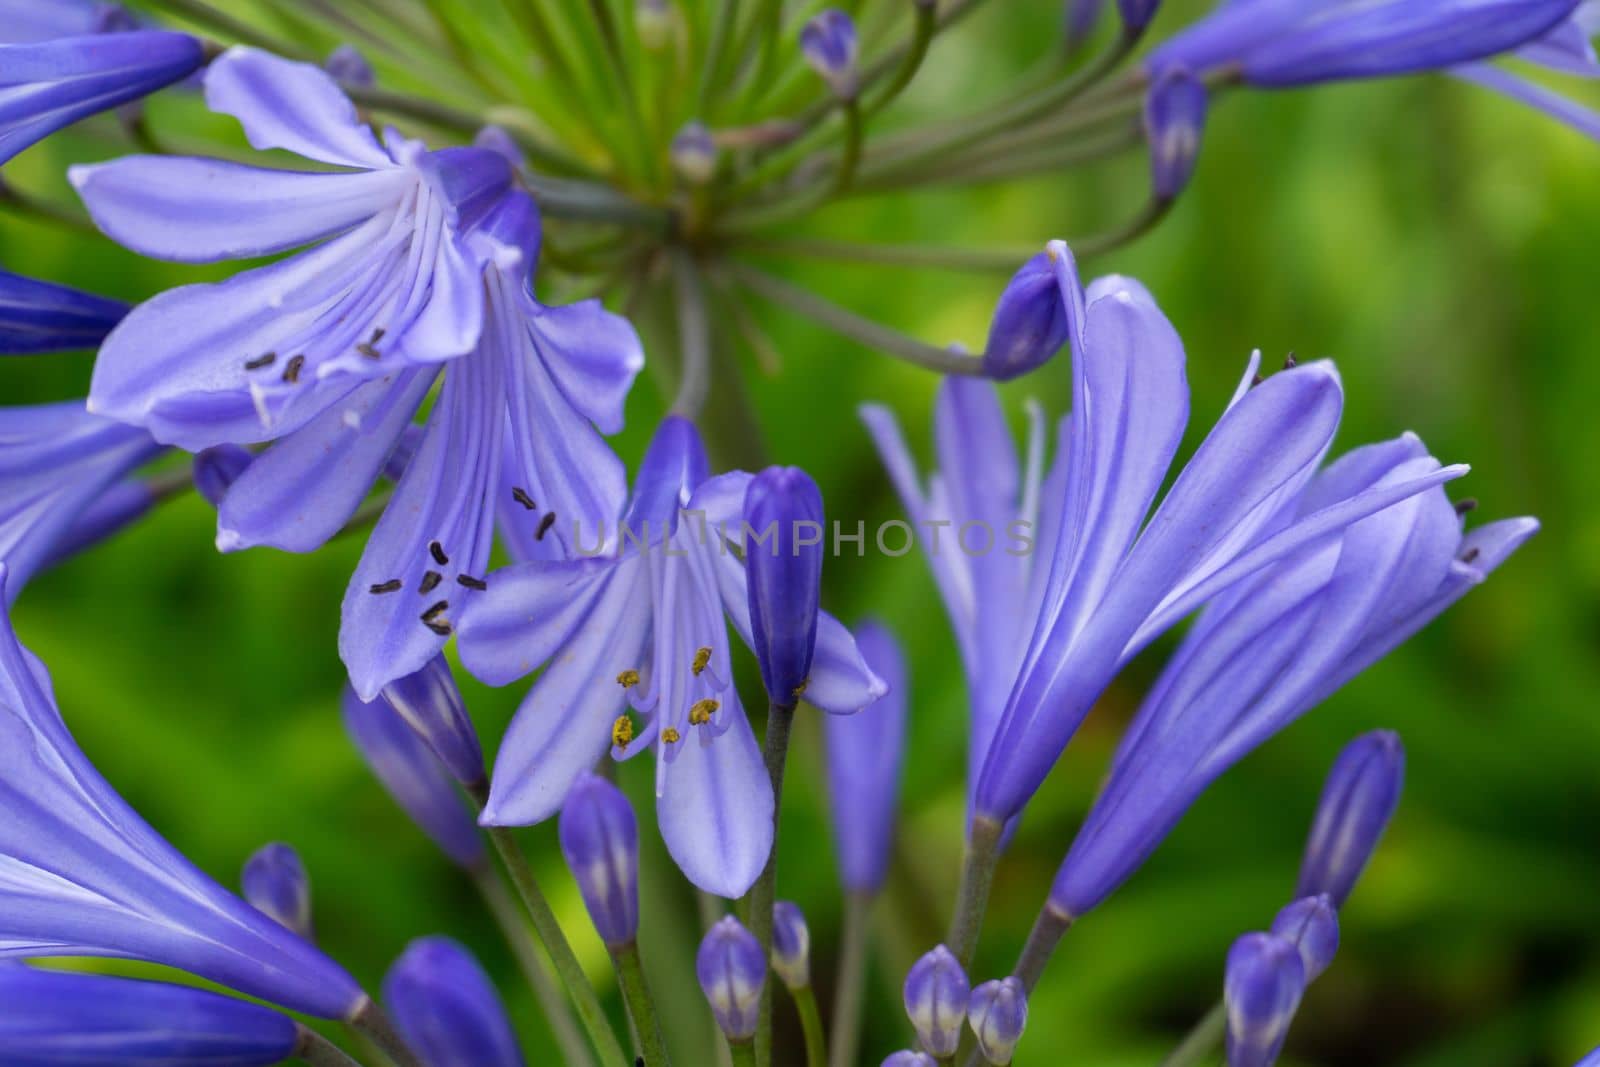 Lilac inflorescences of African Agapanthus in the garden close up